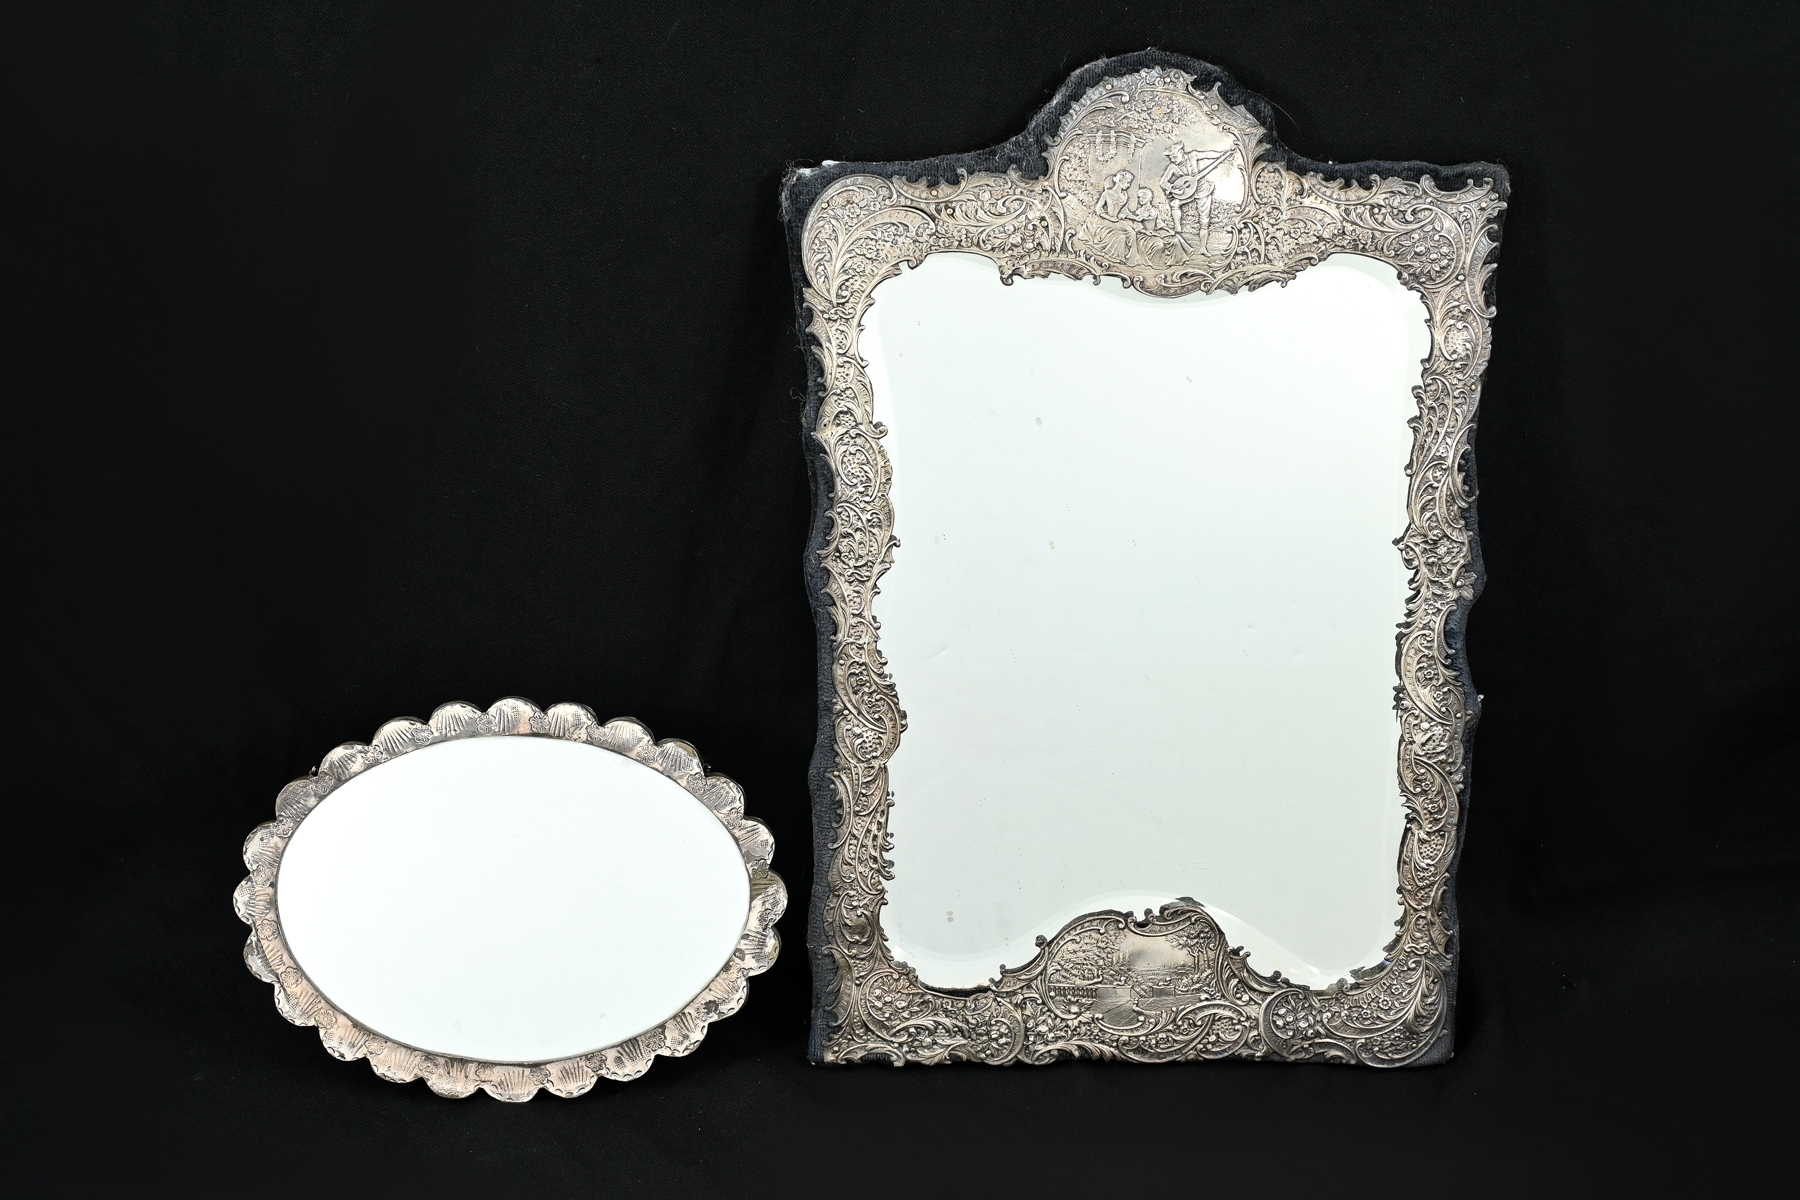 2 STERLING SILVER FRAMED MIRRORS: